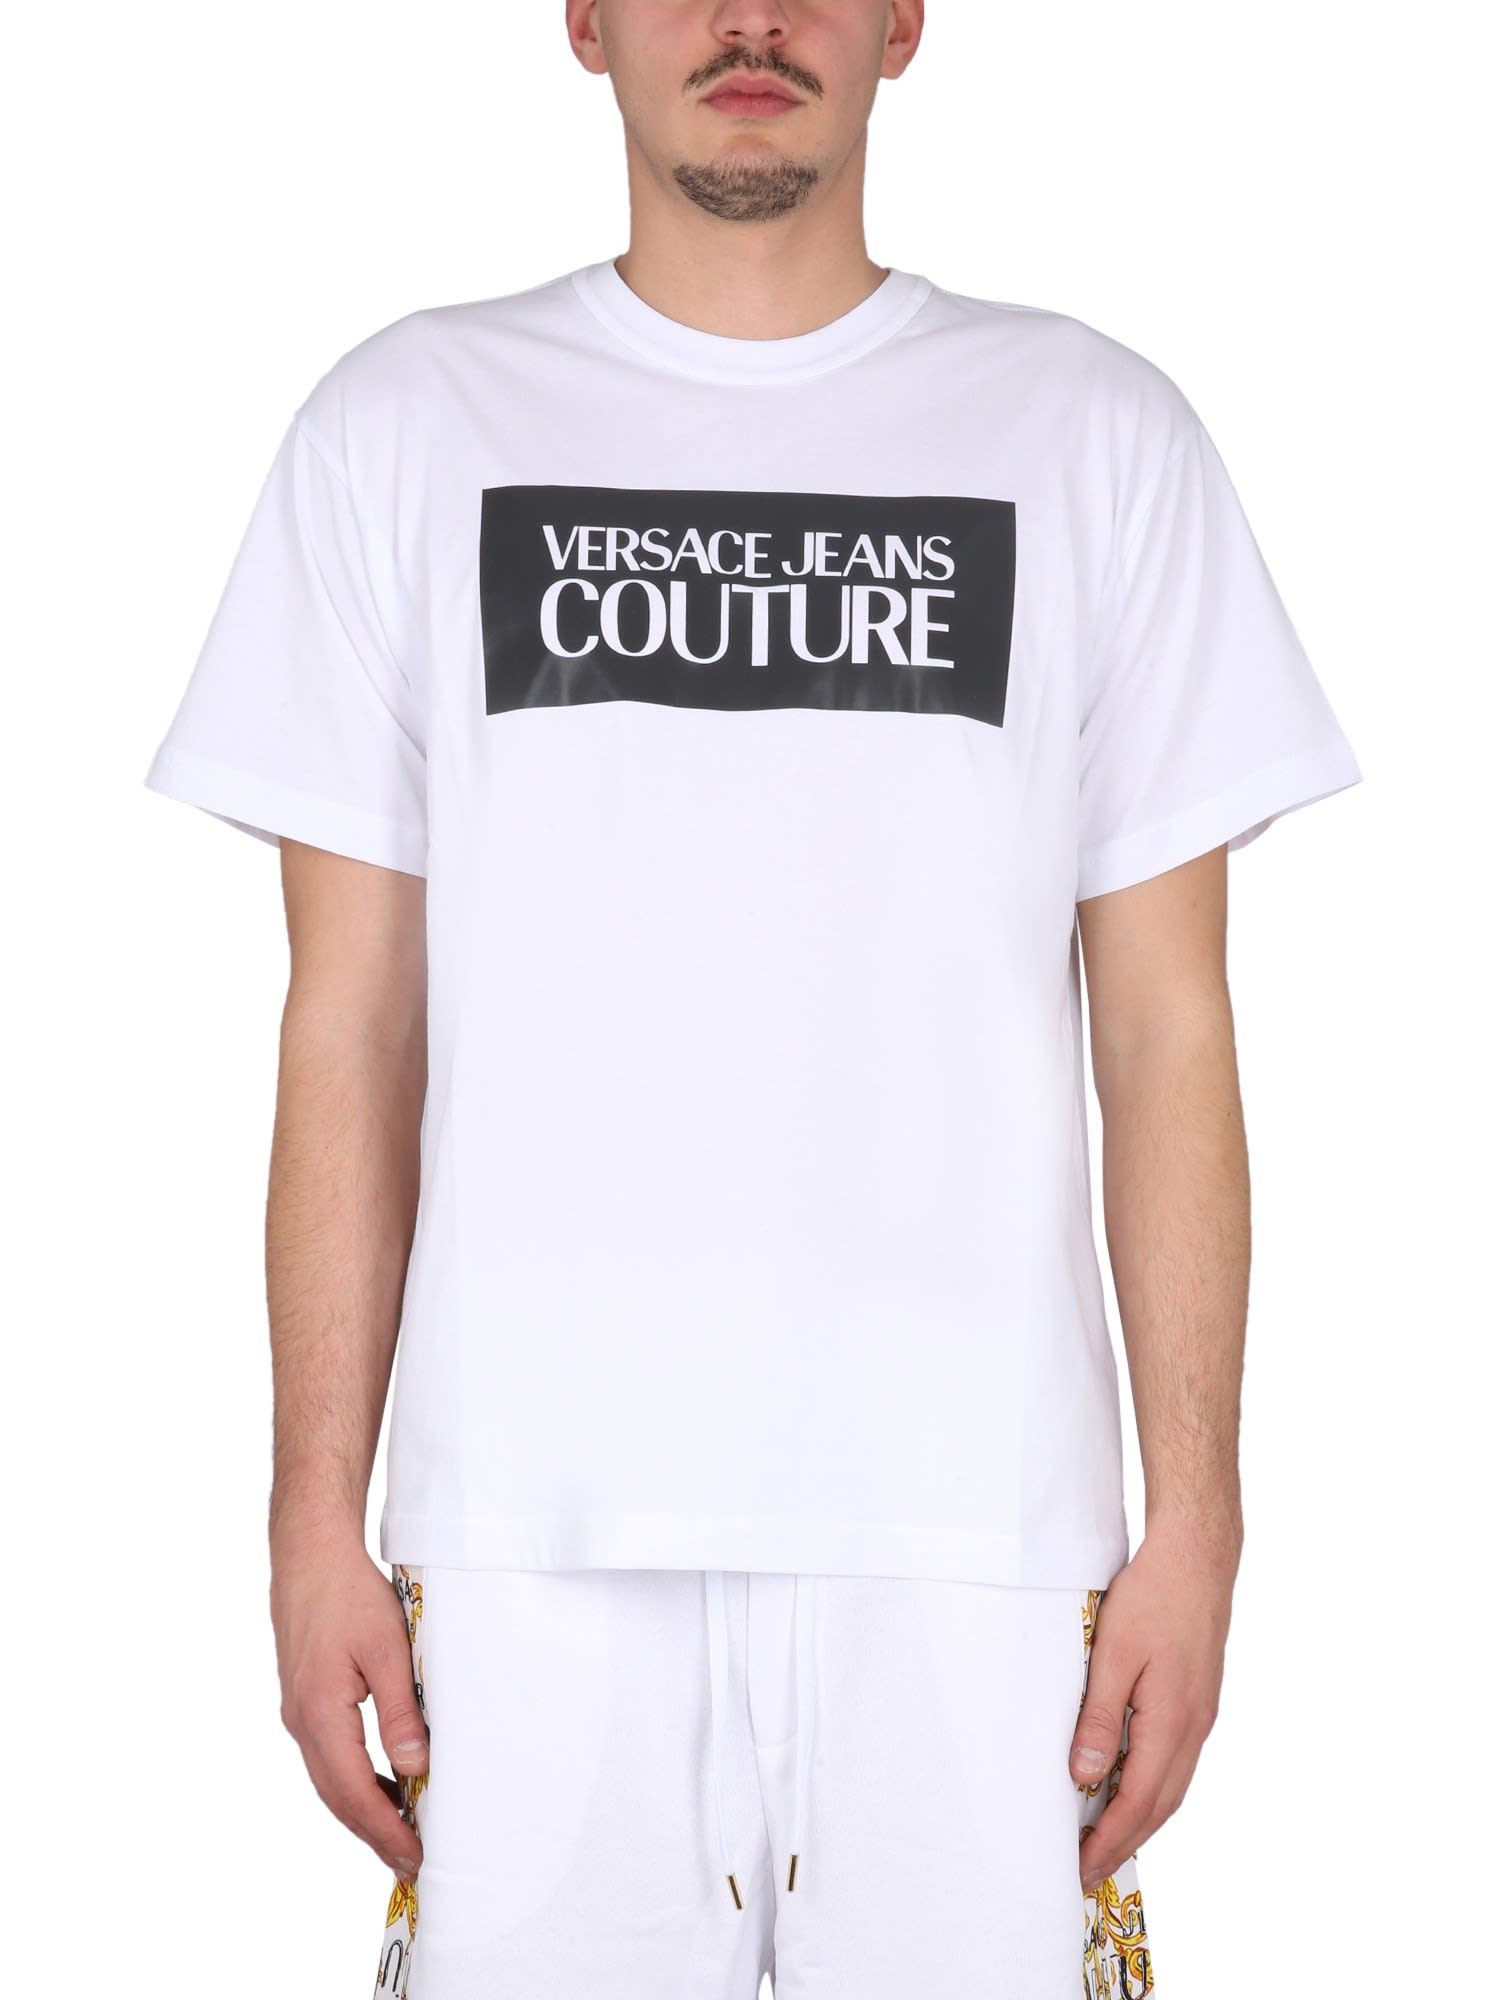 VERSACE JEANS COUTURE SQUARE LOGO T-SHIRT